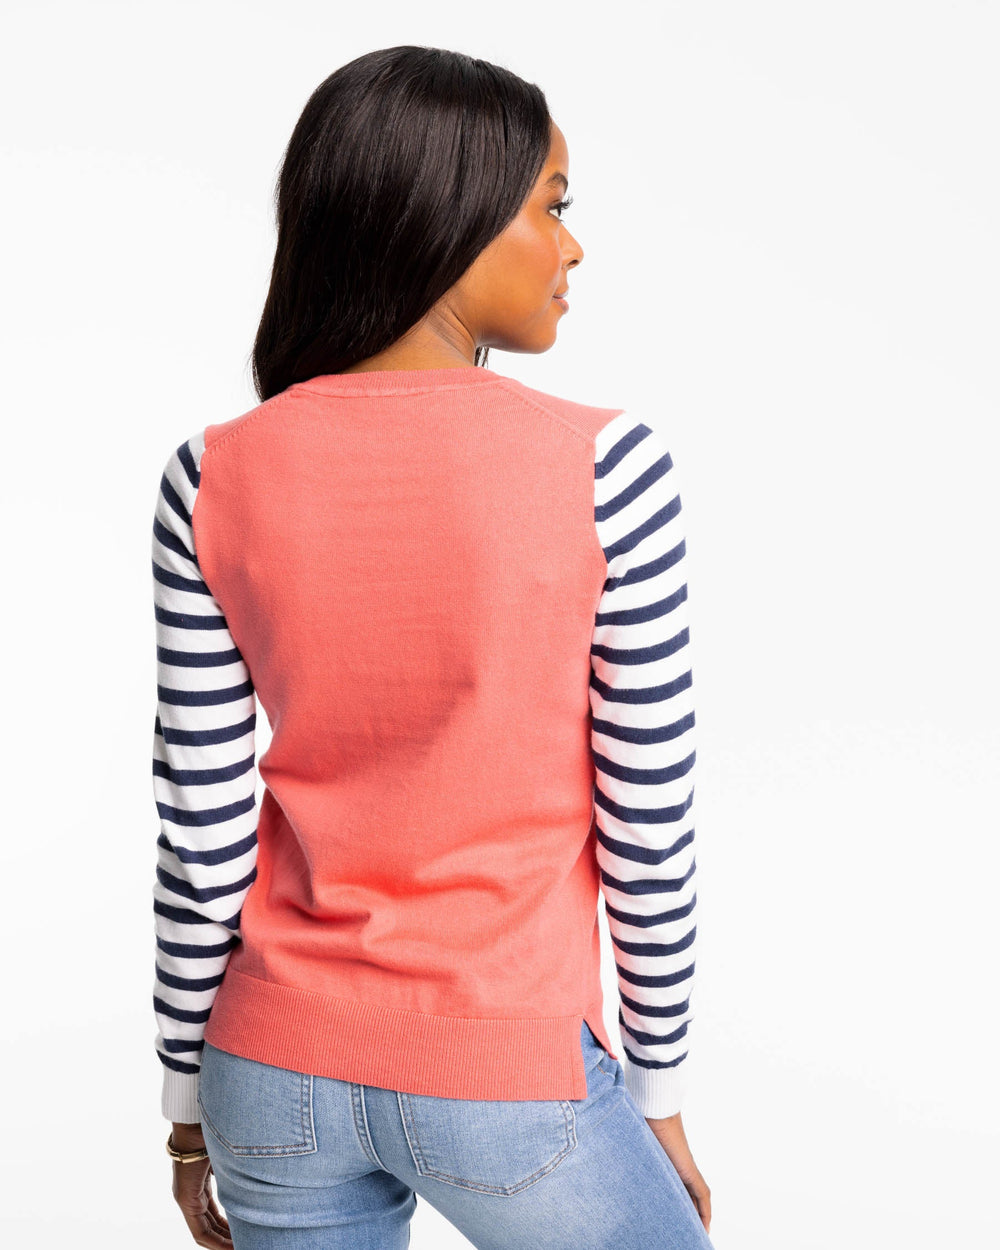 The back view of the Color Block Stripe Fireside Sweater by Southern Tide - Mineral Red